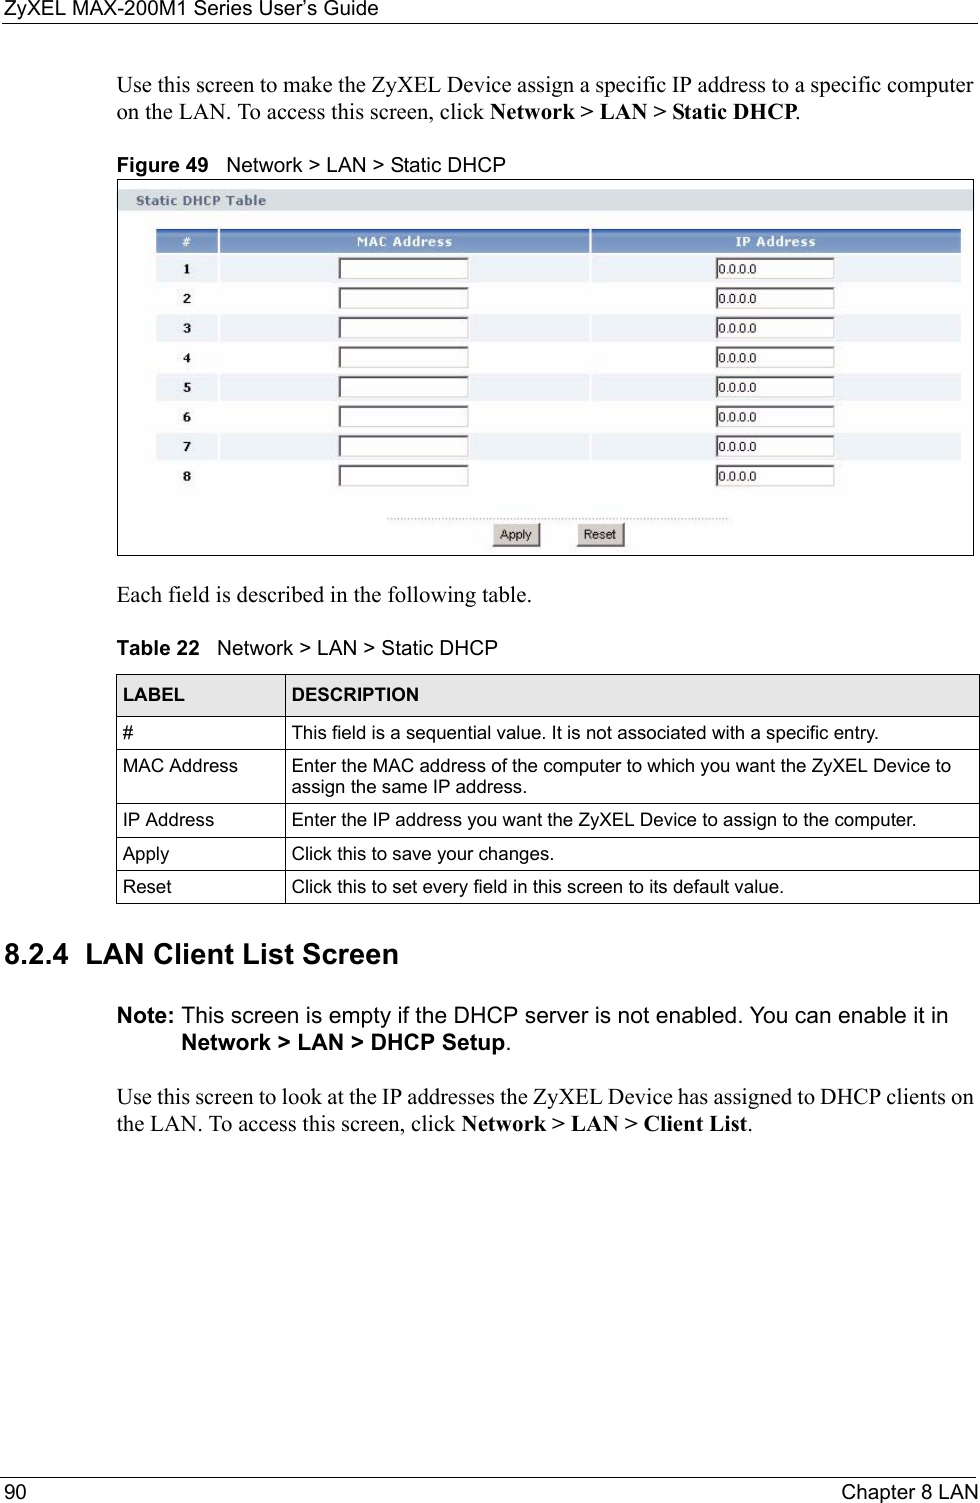 ZyXEL MAX-200M1 Series User’s Guide90 Chapter 8 LANUse this screen to make the ZyXEL Device assign a specific IP address to a specific computer on the LAN. To access this screen, click Network &gt; LAN &gt; Static DHCP.Figure 49   Network &gt; LAN &gt; Static DHCPEach field is described in the following table.8.2.4  LAN Client List ScreenNote: This screen is empty if the DHCP server is not enabled. You can enable it in Network &gt; LAN &gt; DHCP Setup.Use this screen to look at the IP addresses the ZyXEL Device has assigned to DHCP clients on the LAN. To access this screen, click Network &gt; LAN &gt; Client List.Table 22   Network &gt; LAN &gt; Static DHCPLABEL DESCRIPTION#This field is a sequential value. It is not associated with a specific entry.MAC Address Enter the MAC address of the computer to which you want the ZyXEL Device to assign the same IP address.IP Address Enter the IP address you want the ZyXEL Device to assign to the computer.Apply Click this to save your changes.Reset Click this to set every field in this screen to its default value.